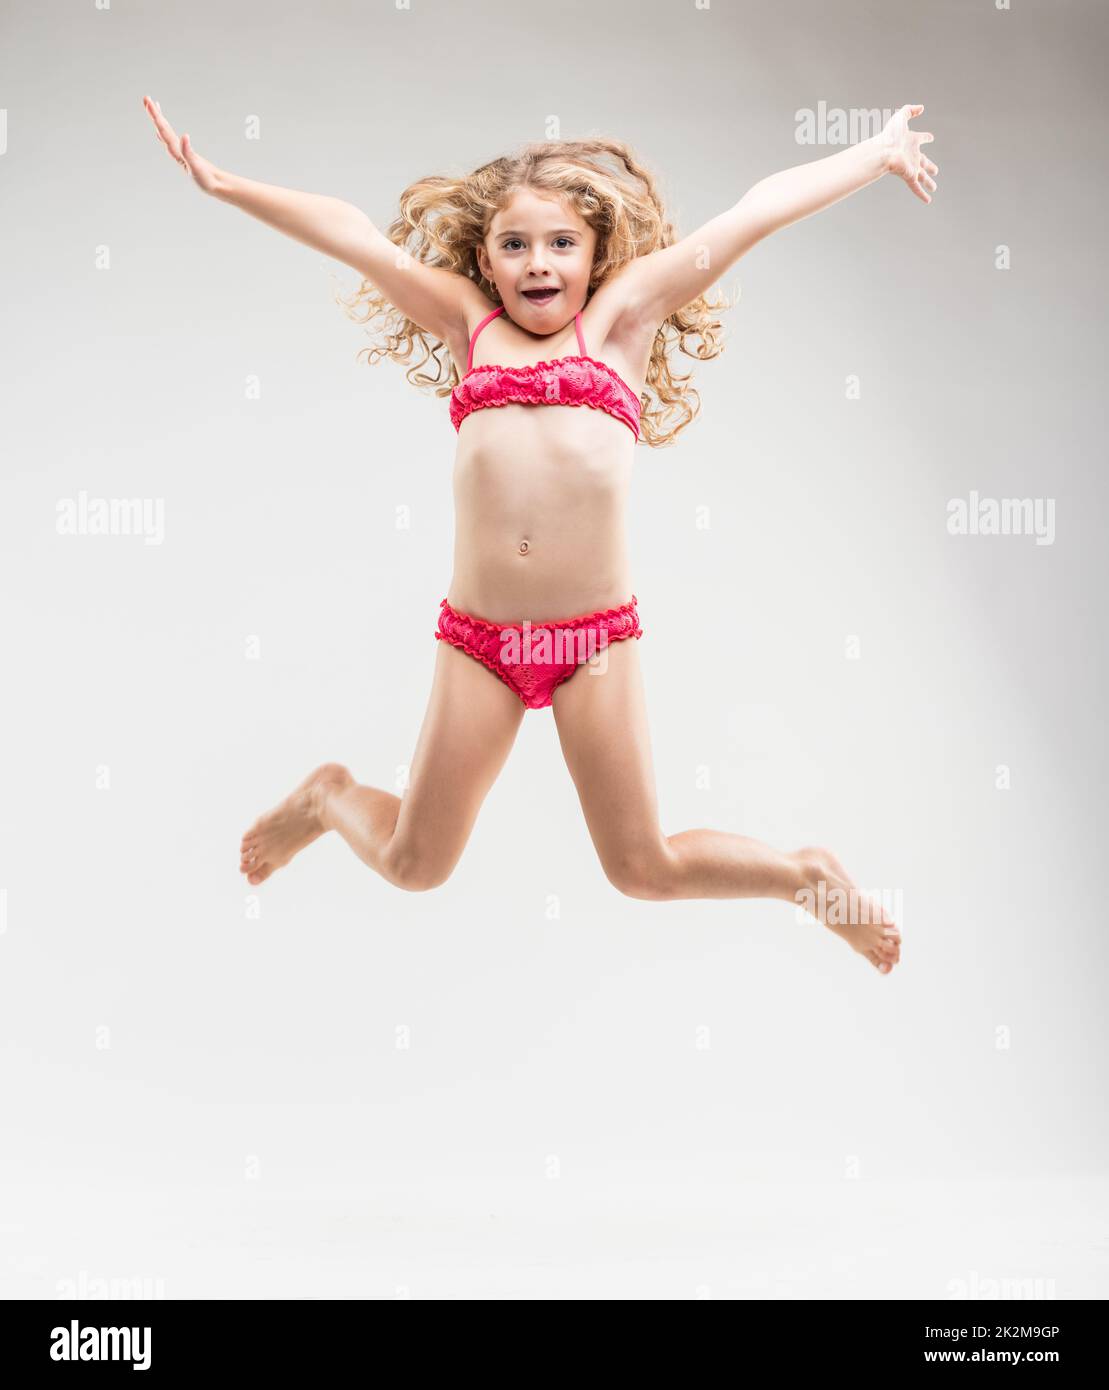 Agile exuberant little girl leaping in the air Stock Photo